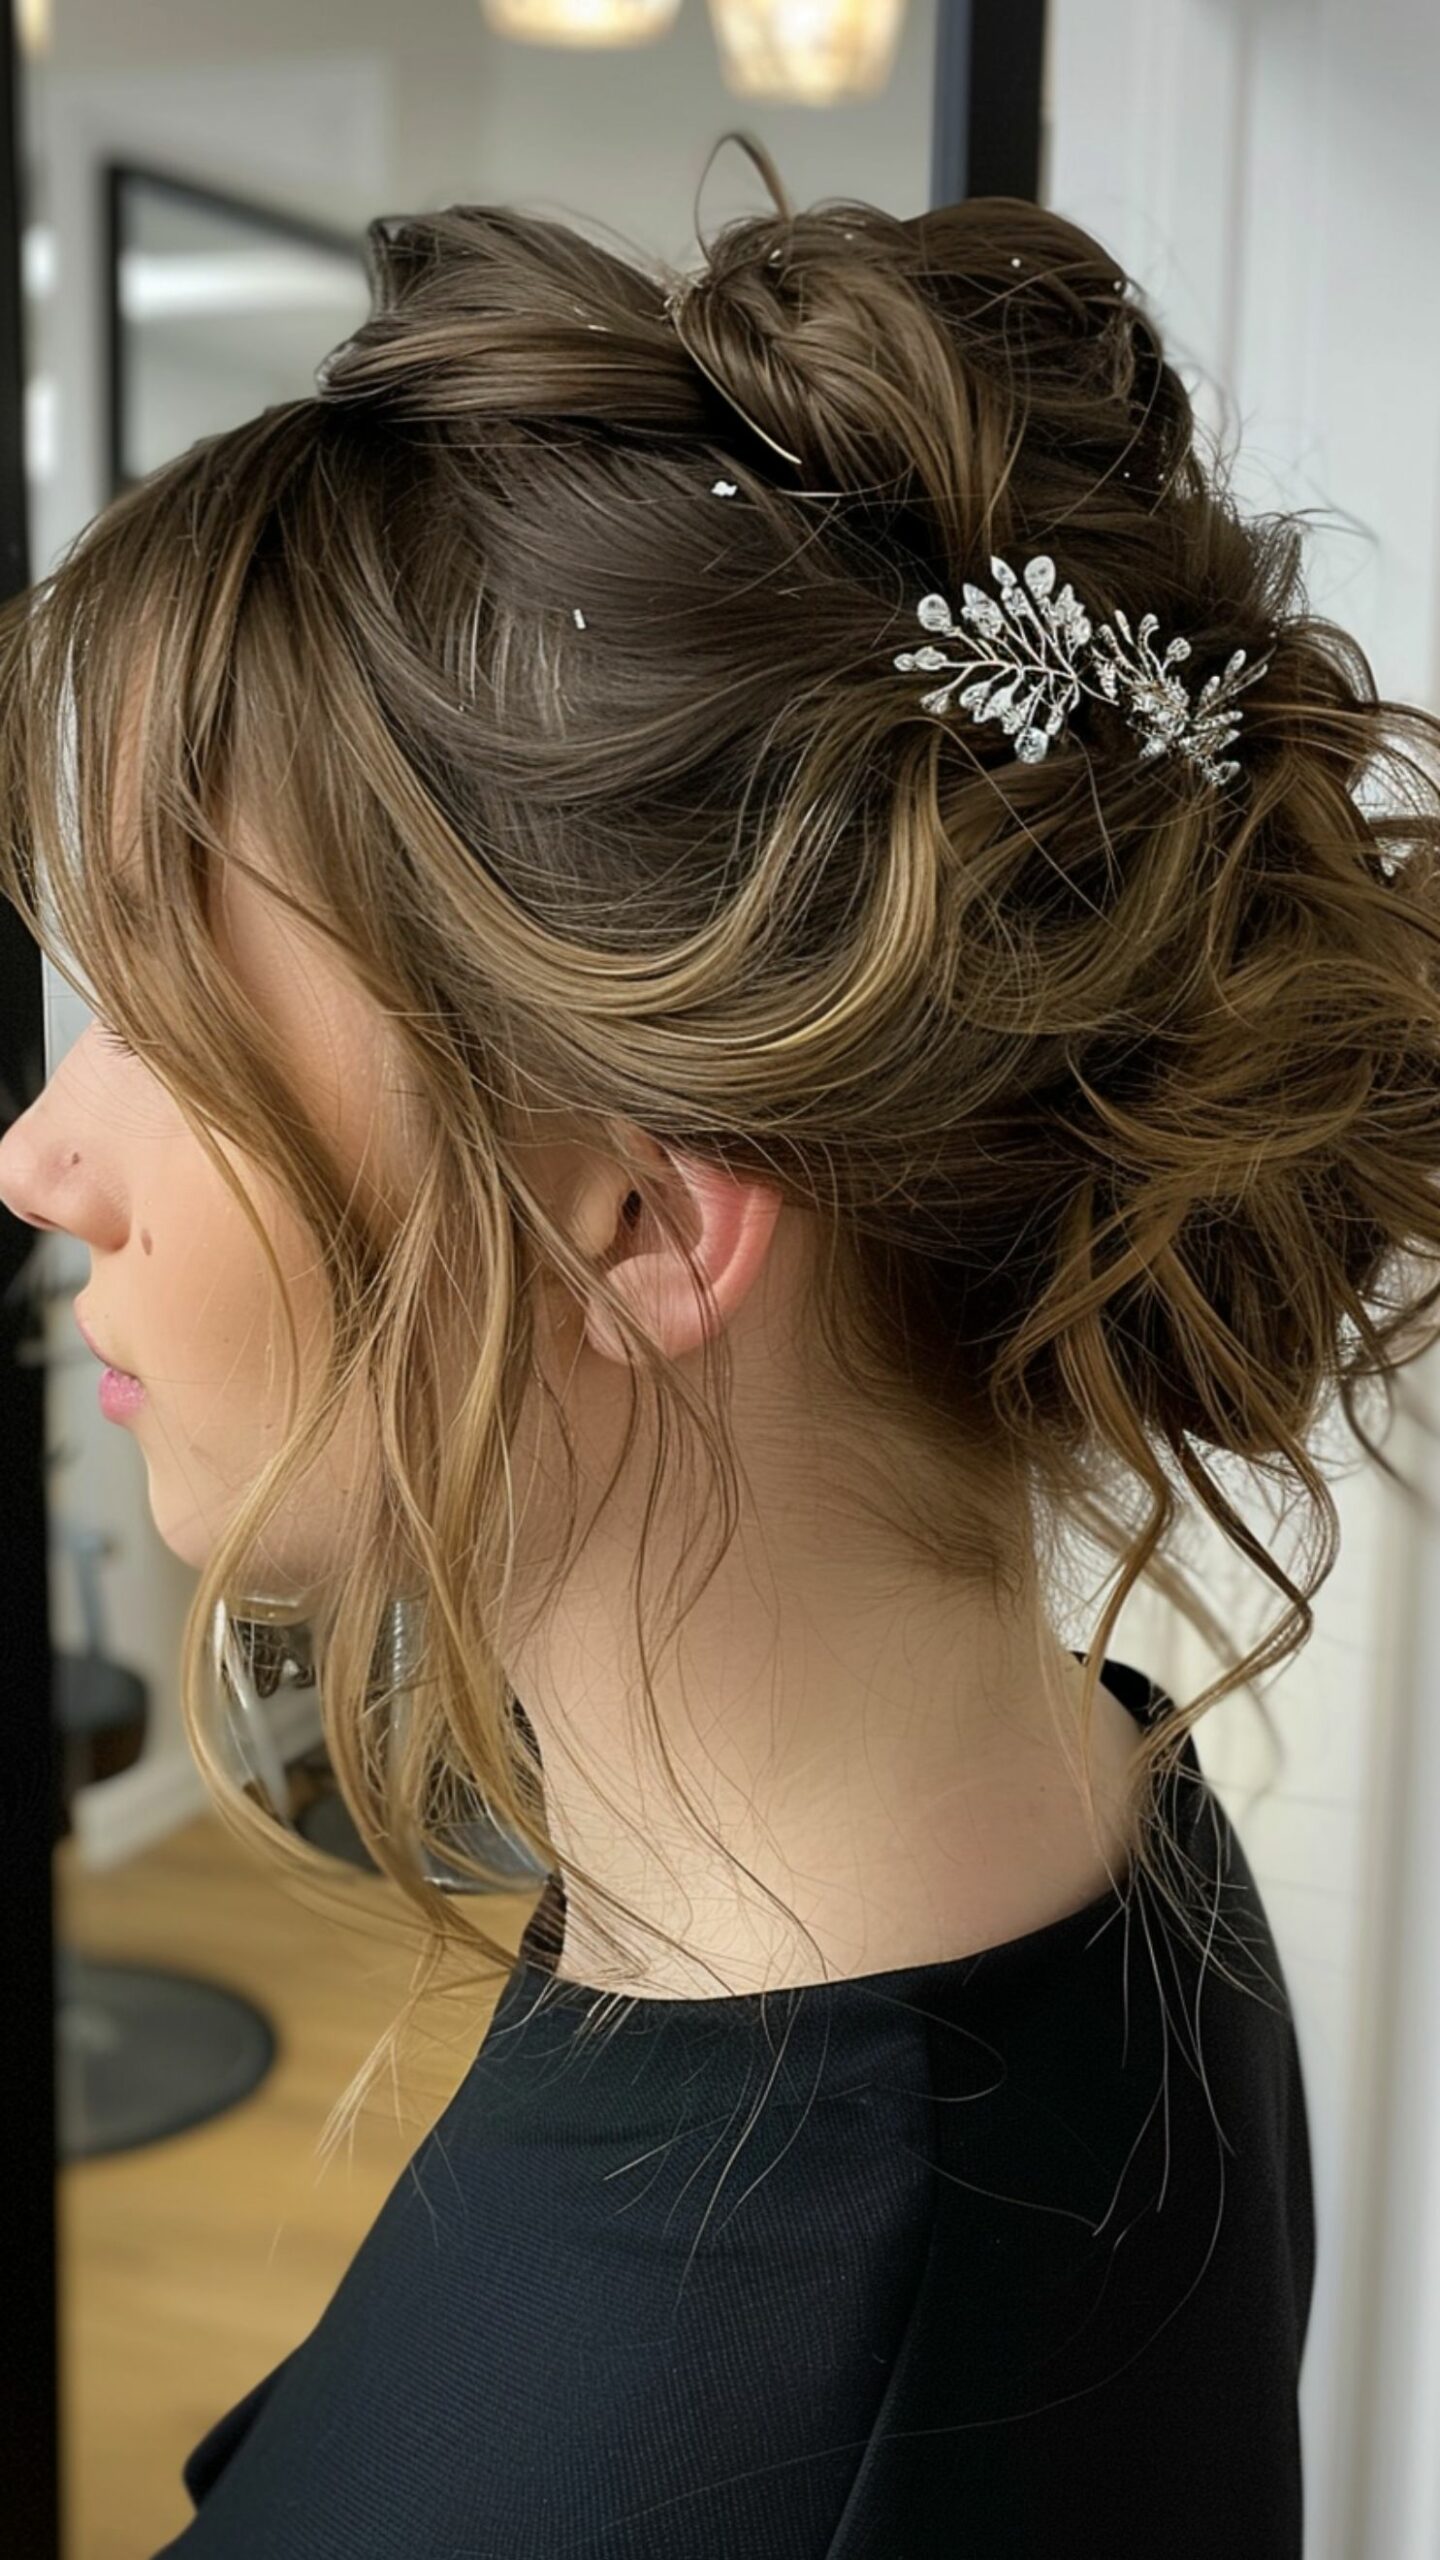 A woman modelling a messy bun wih a hair accessory and face-framing strands hairstyle.